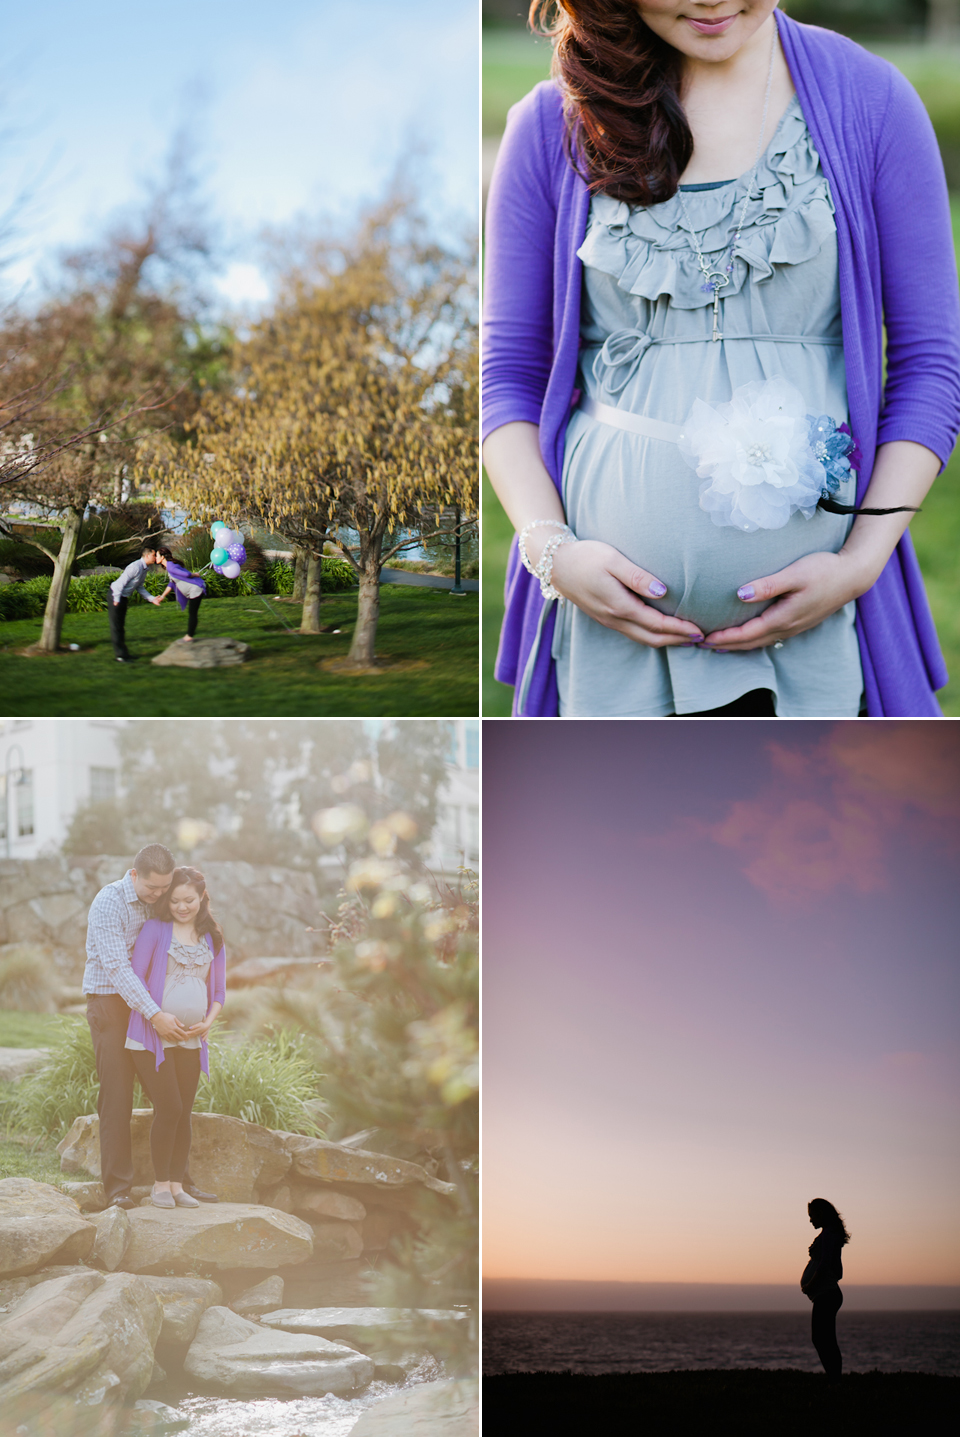 presidio maternity session, maternity photoshoot, creative maternity photos, belly band, silhouette pregnant woman